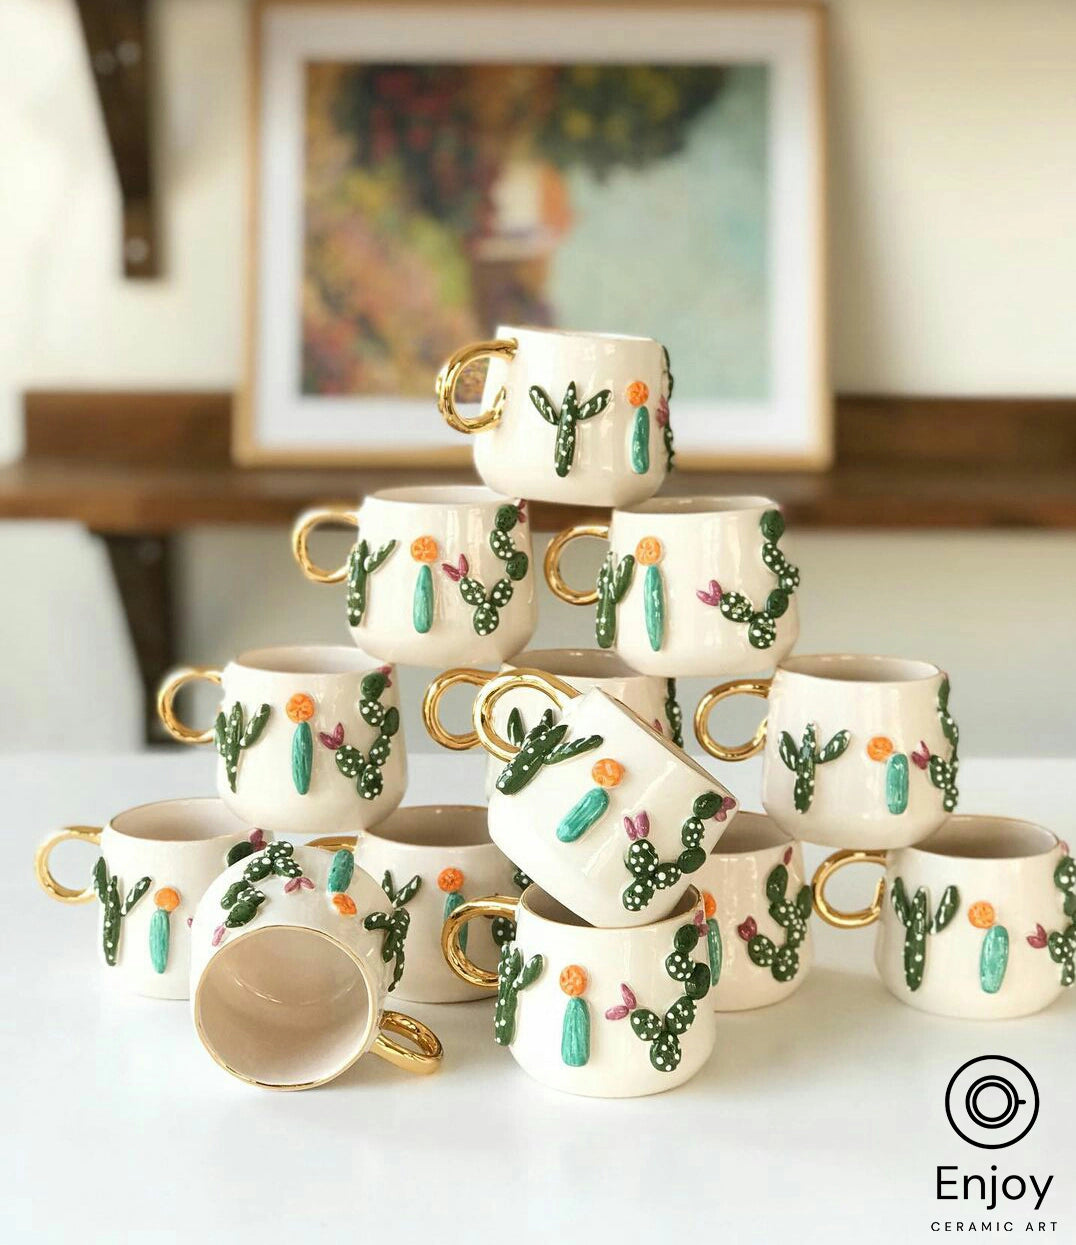 Stacked white mugs with golden handles and green cactus designs in an art studio, with a colorful painting in the background.